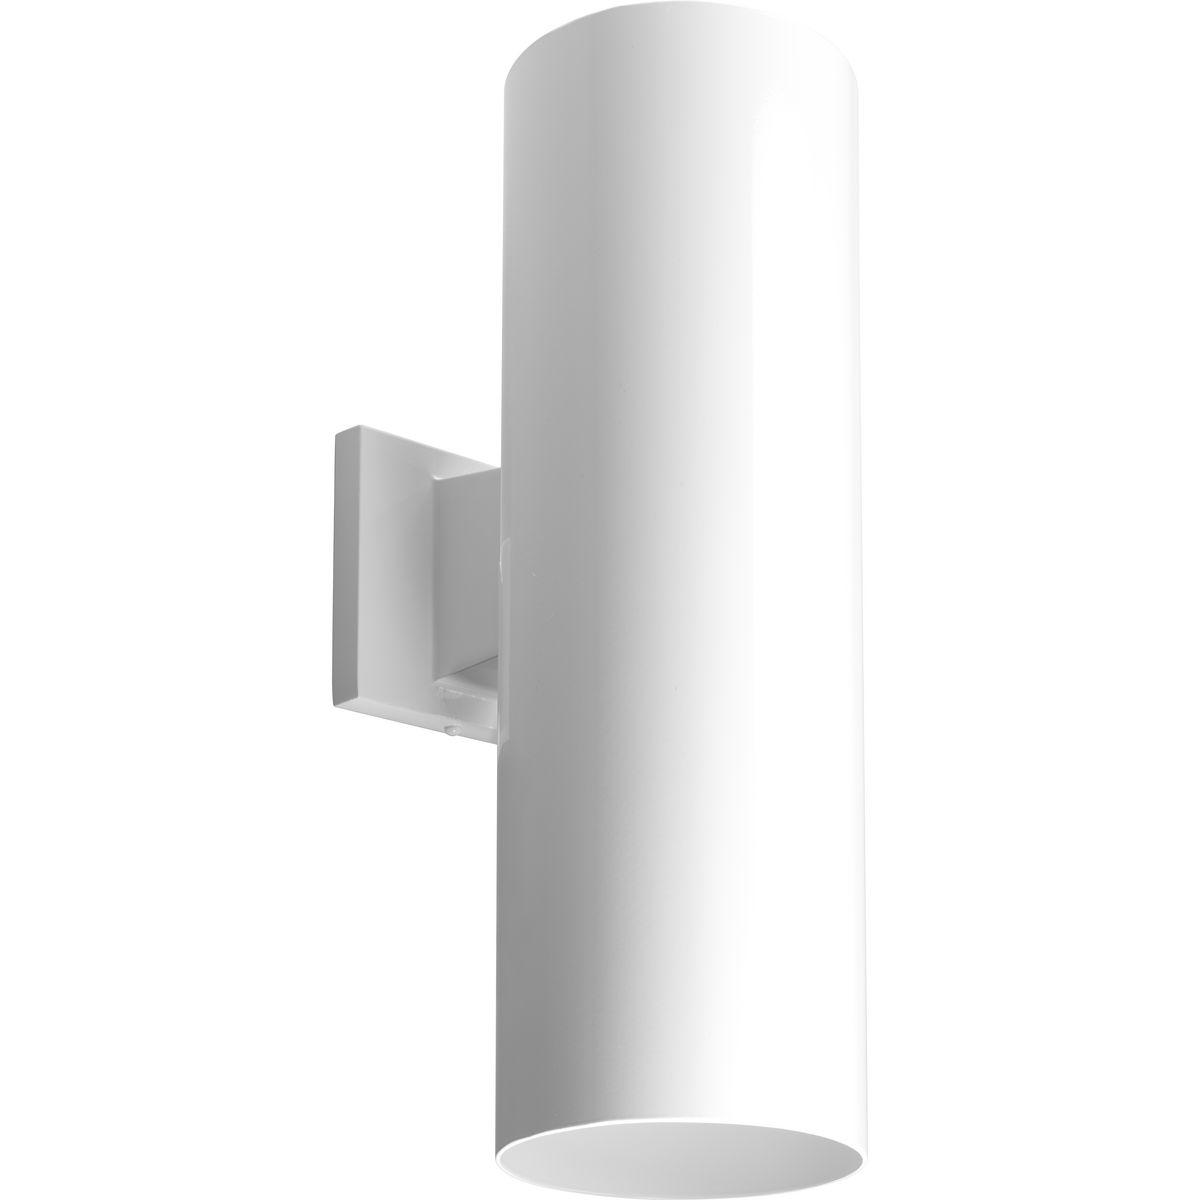 Hubbell P5642-30/30K 6" uplight/downlight wall cylinders are ideal for a wide variety of interior and exterior applications including residential and commercial. The aluminum Cylinders offers a contemporary design with its sleek cylindrical form and elegant fade and chip resi